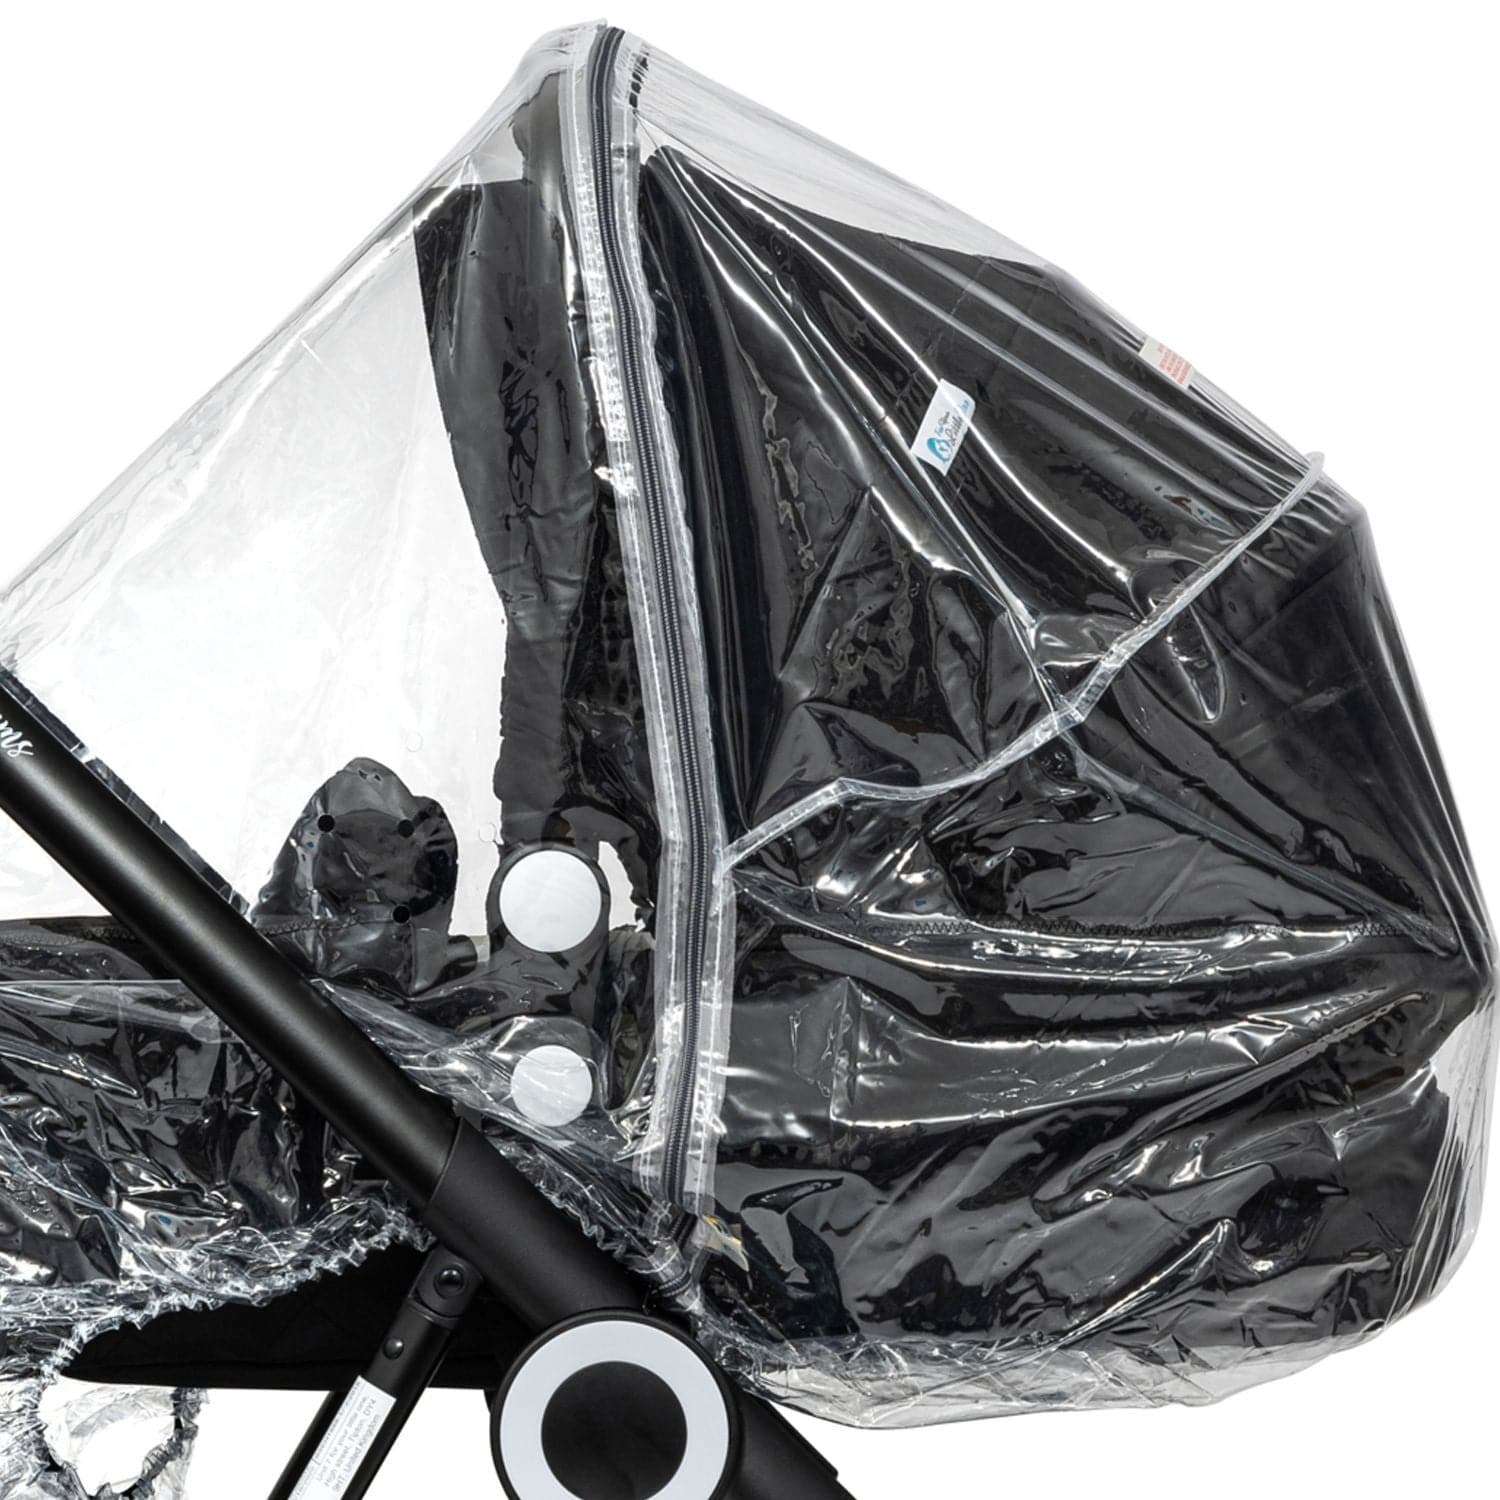 Carrycot Raincover Compatible With BabyCare - Fits All Models -  | For Your Little One